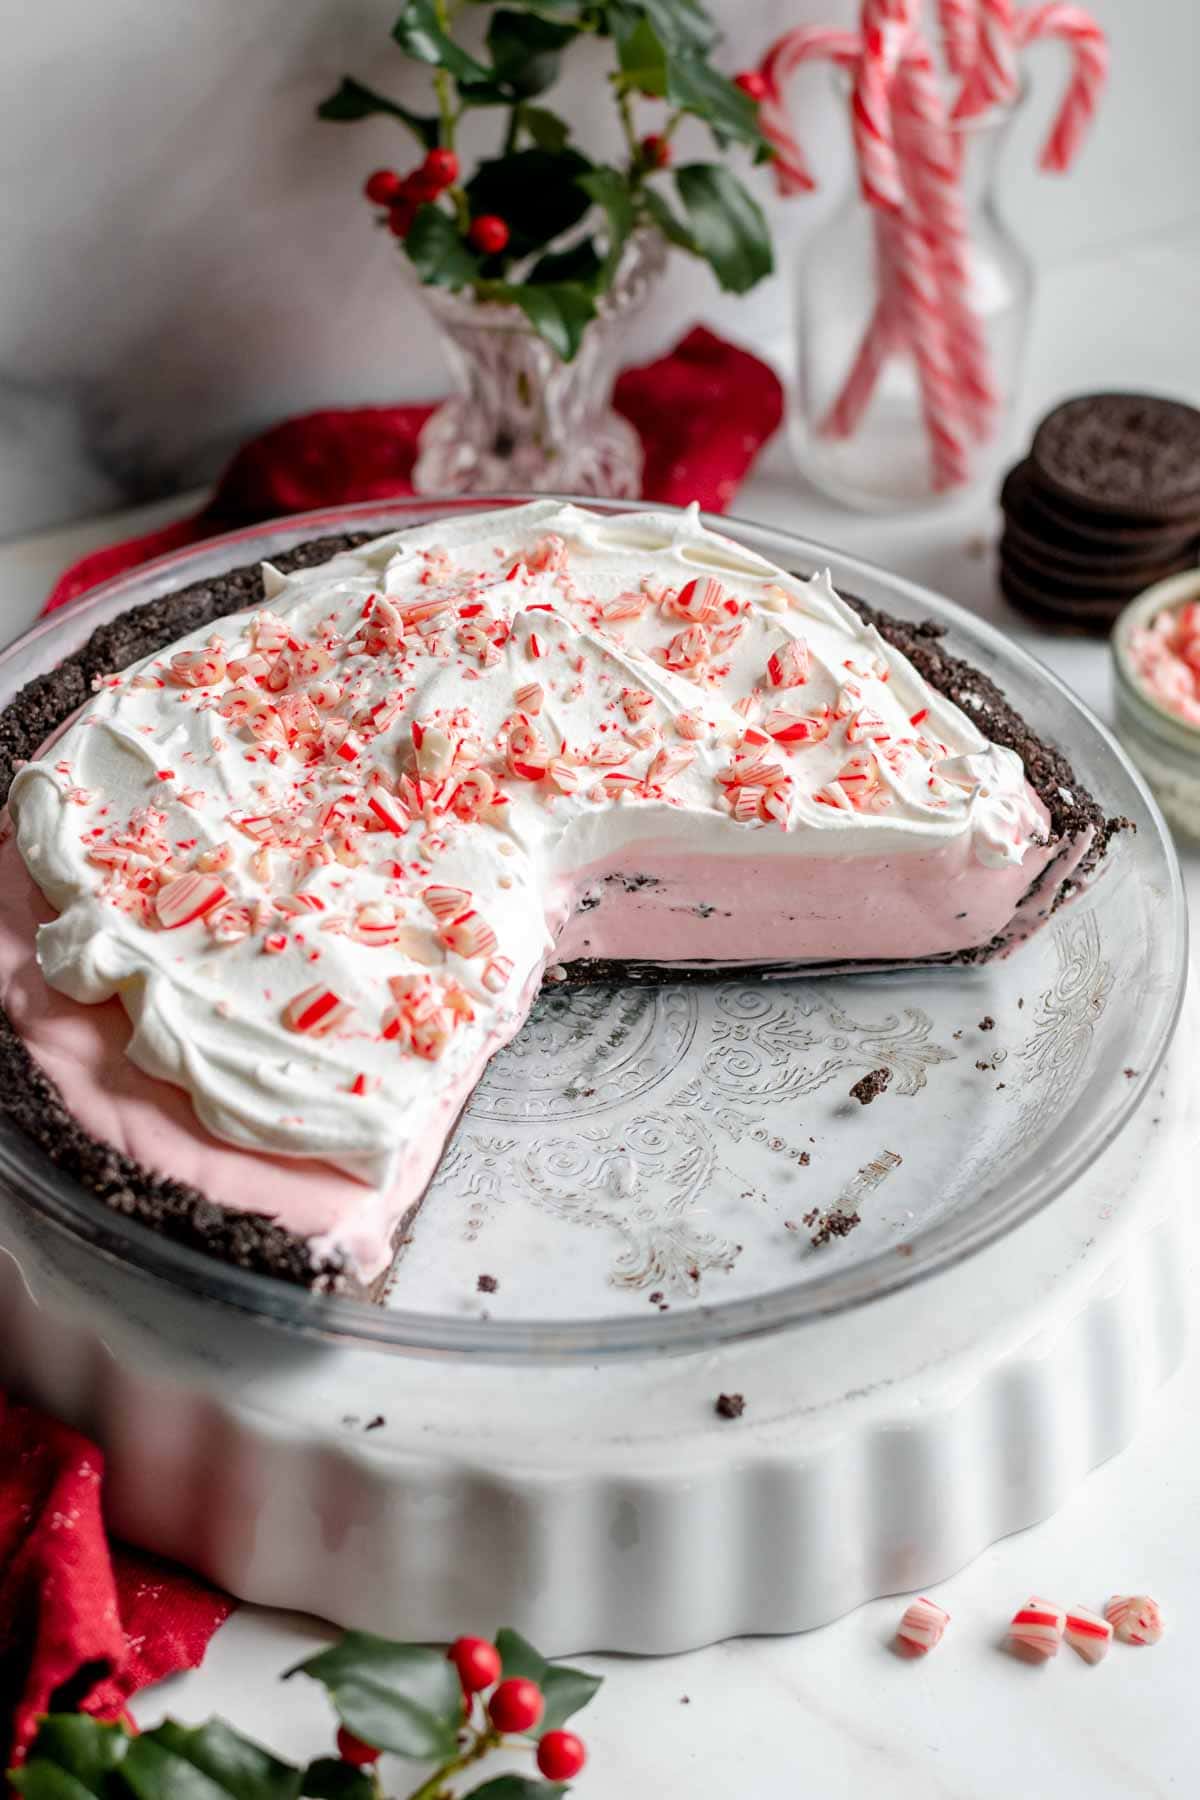 Candy Cane Pie in dish with slices removed